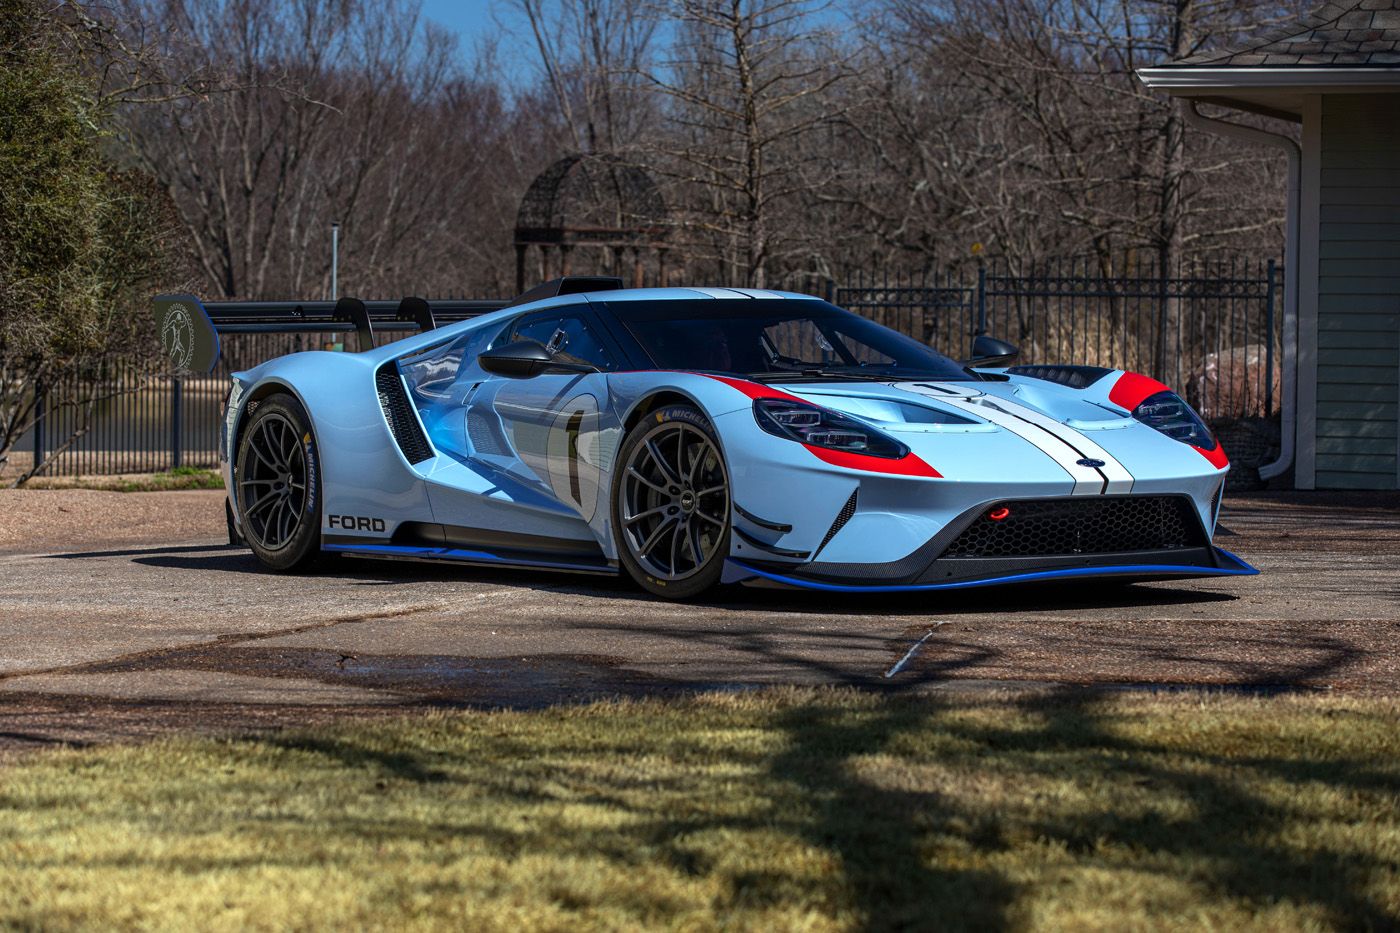 2021 Ford GT: Race car designed to race, but built for the blacktop.